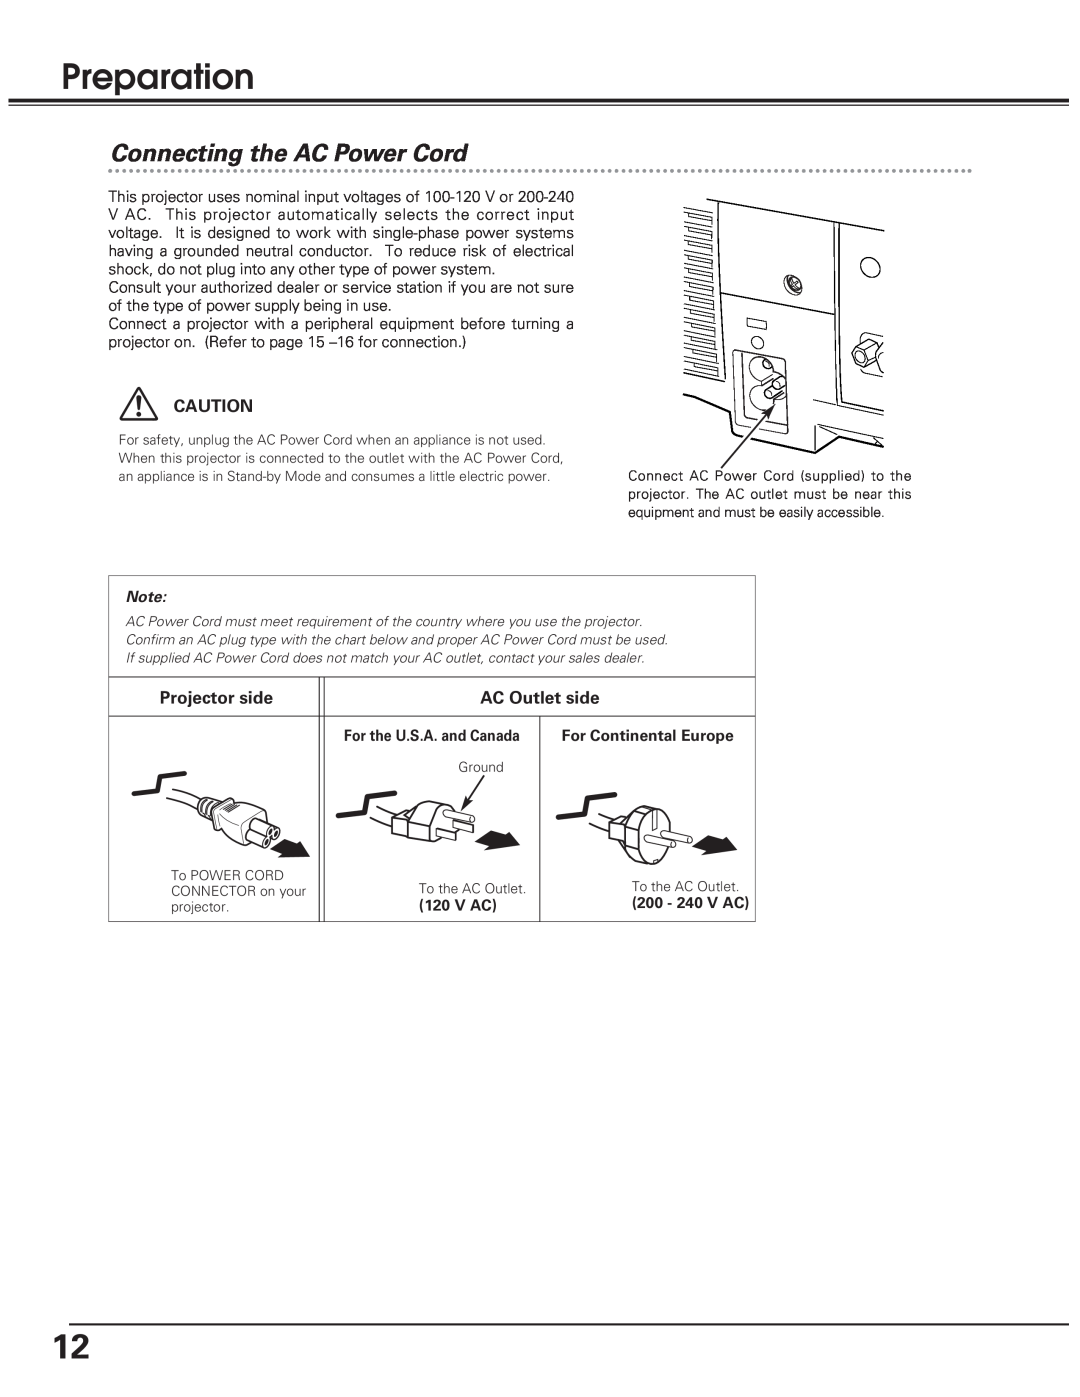 Eiki LC-SD10 owner manual Preparation, Connecting the AC Power Cord, Projector side, AC Outlet side 